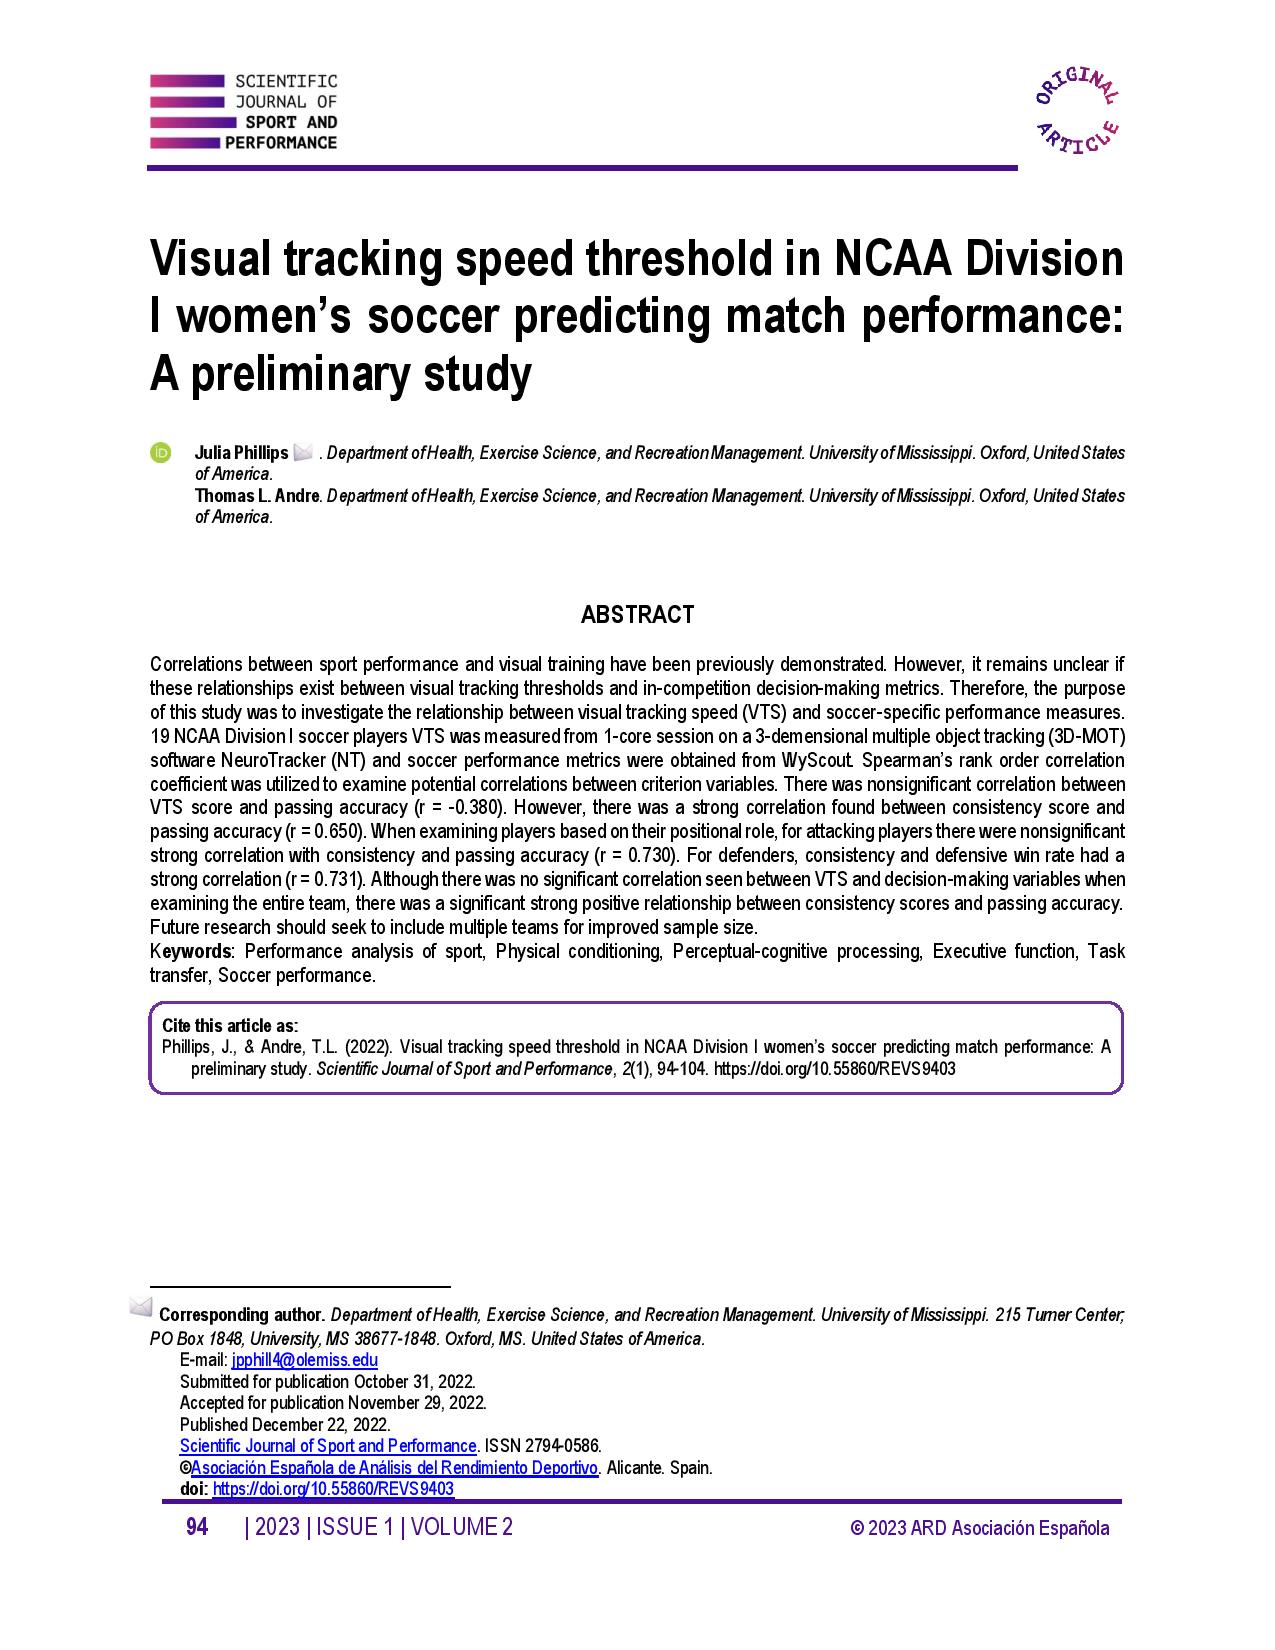 Visual tracking speed threshold in NCAA Division I women’s soccer predicting match performance: A preliminary study